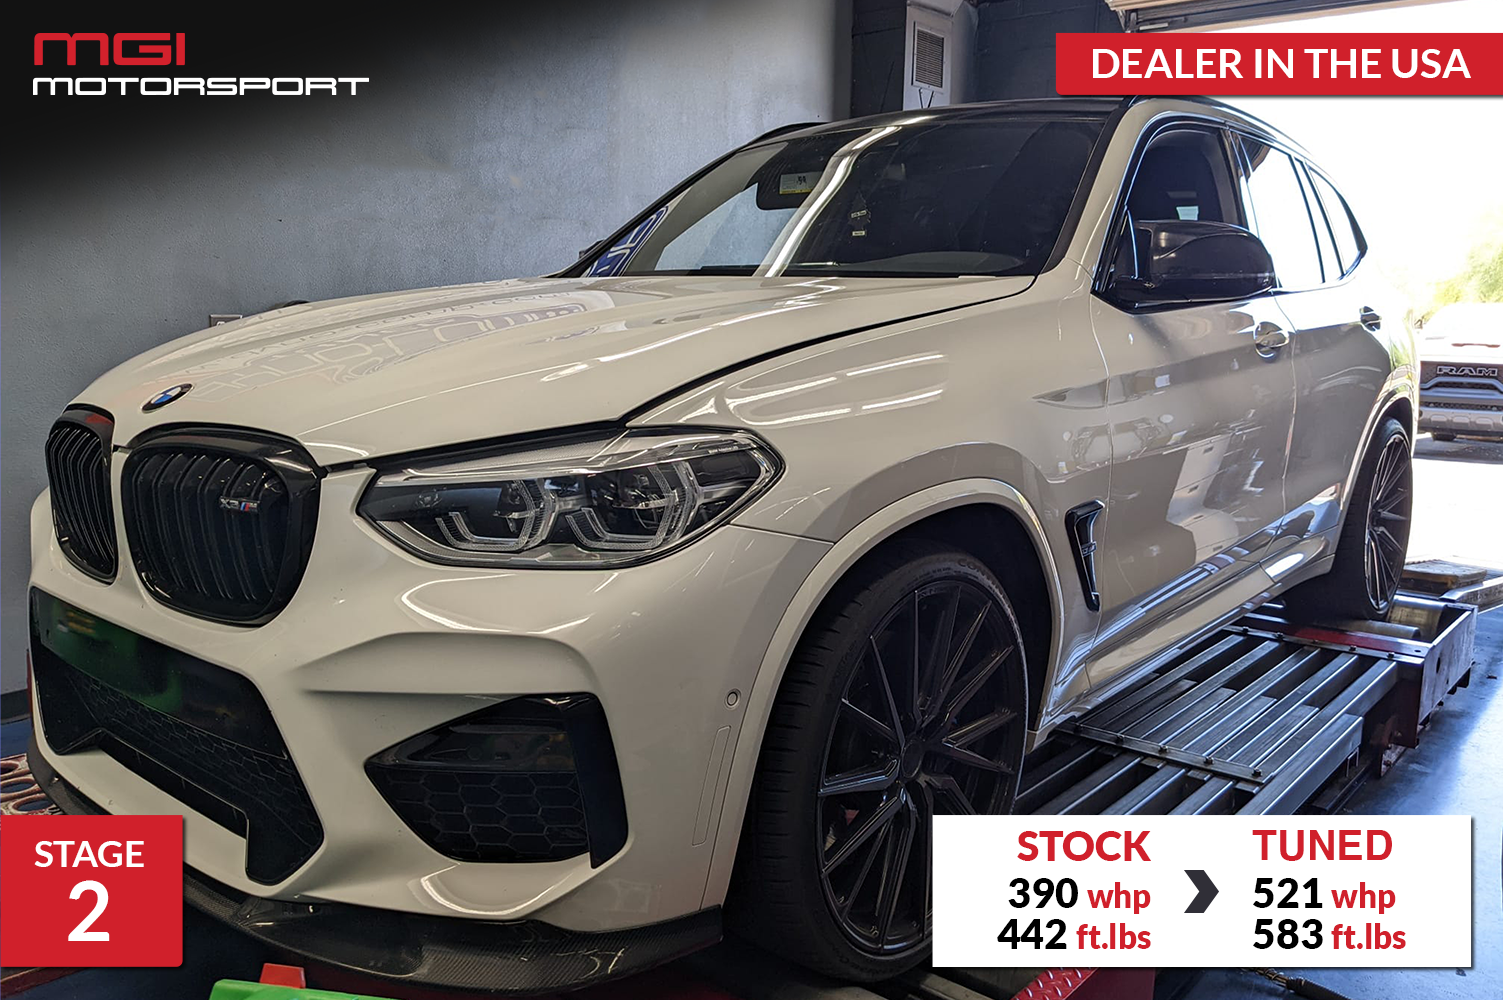 Featured image for “BMW X3M 3.0L Stage 2 | 521 whp 583 ft.lbs!”